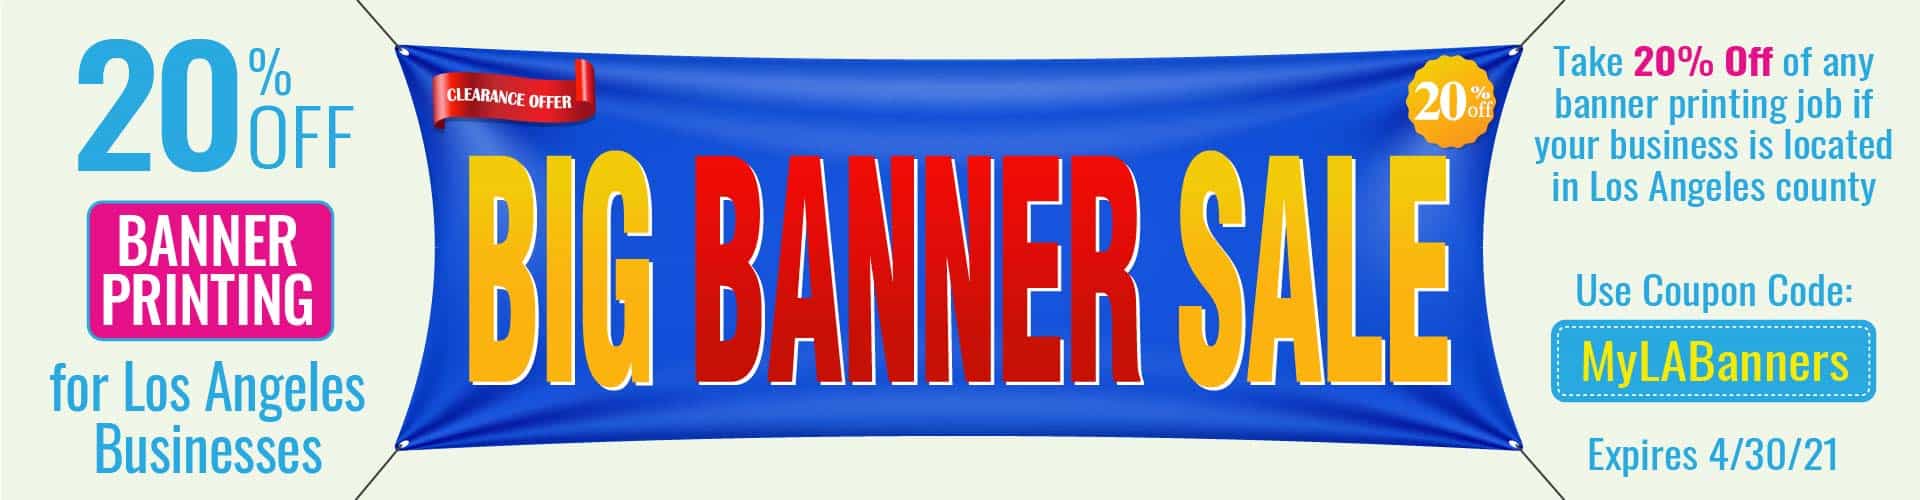 Banner printing special for Los Angeles Businesses